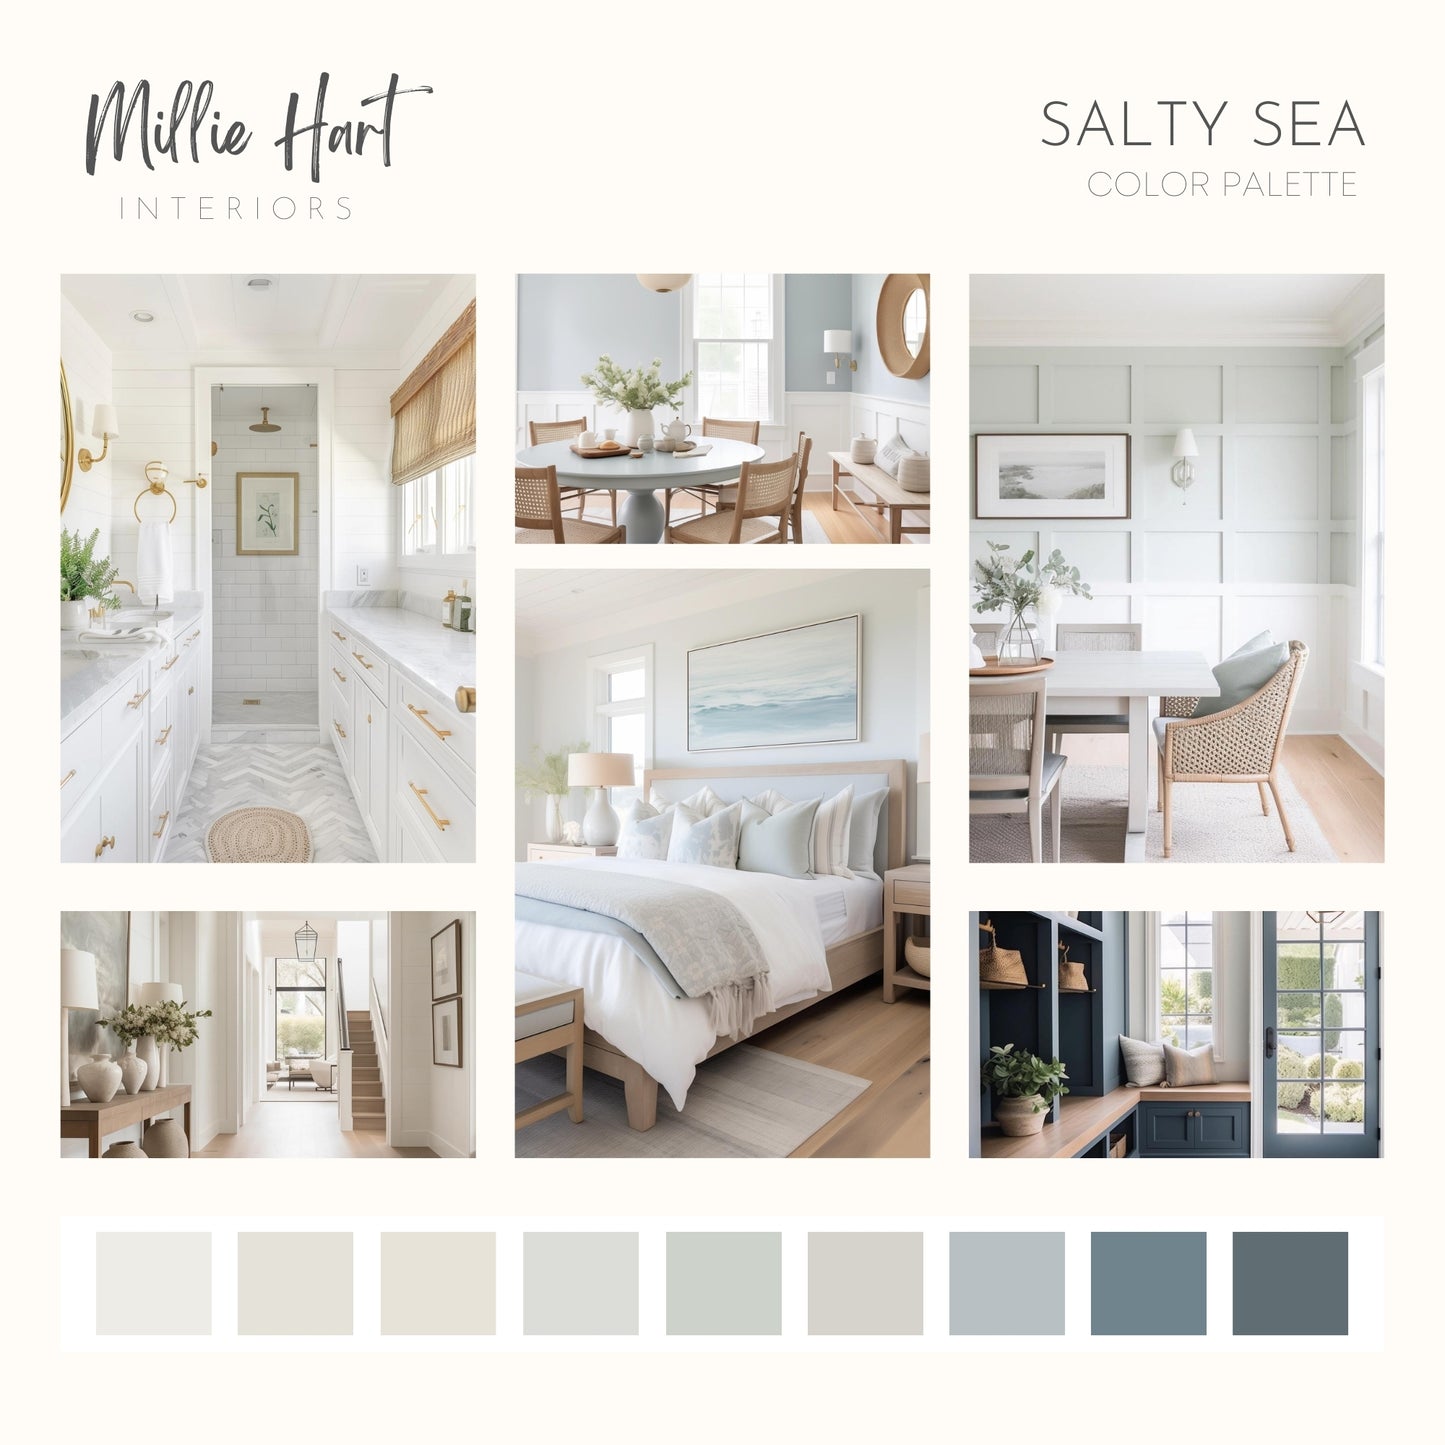 Salty Sea Sherwin Williams Paint Palette, Modern Coastal Interior Paint Colors for Home, Coastal Interior Design Color Palette, Airy Neutrals, Pure White